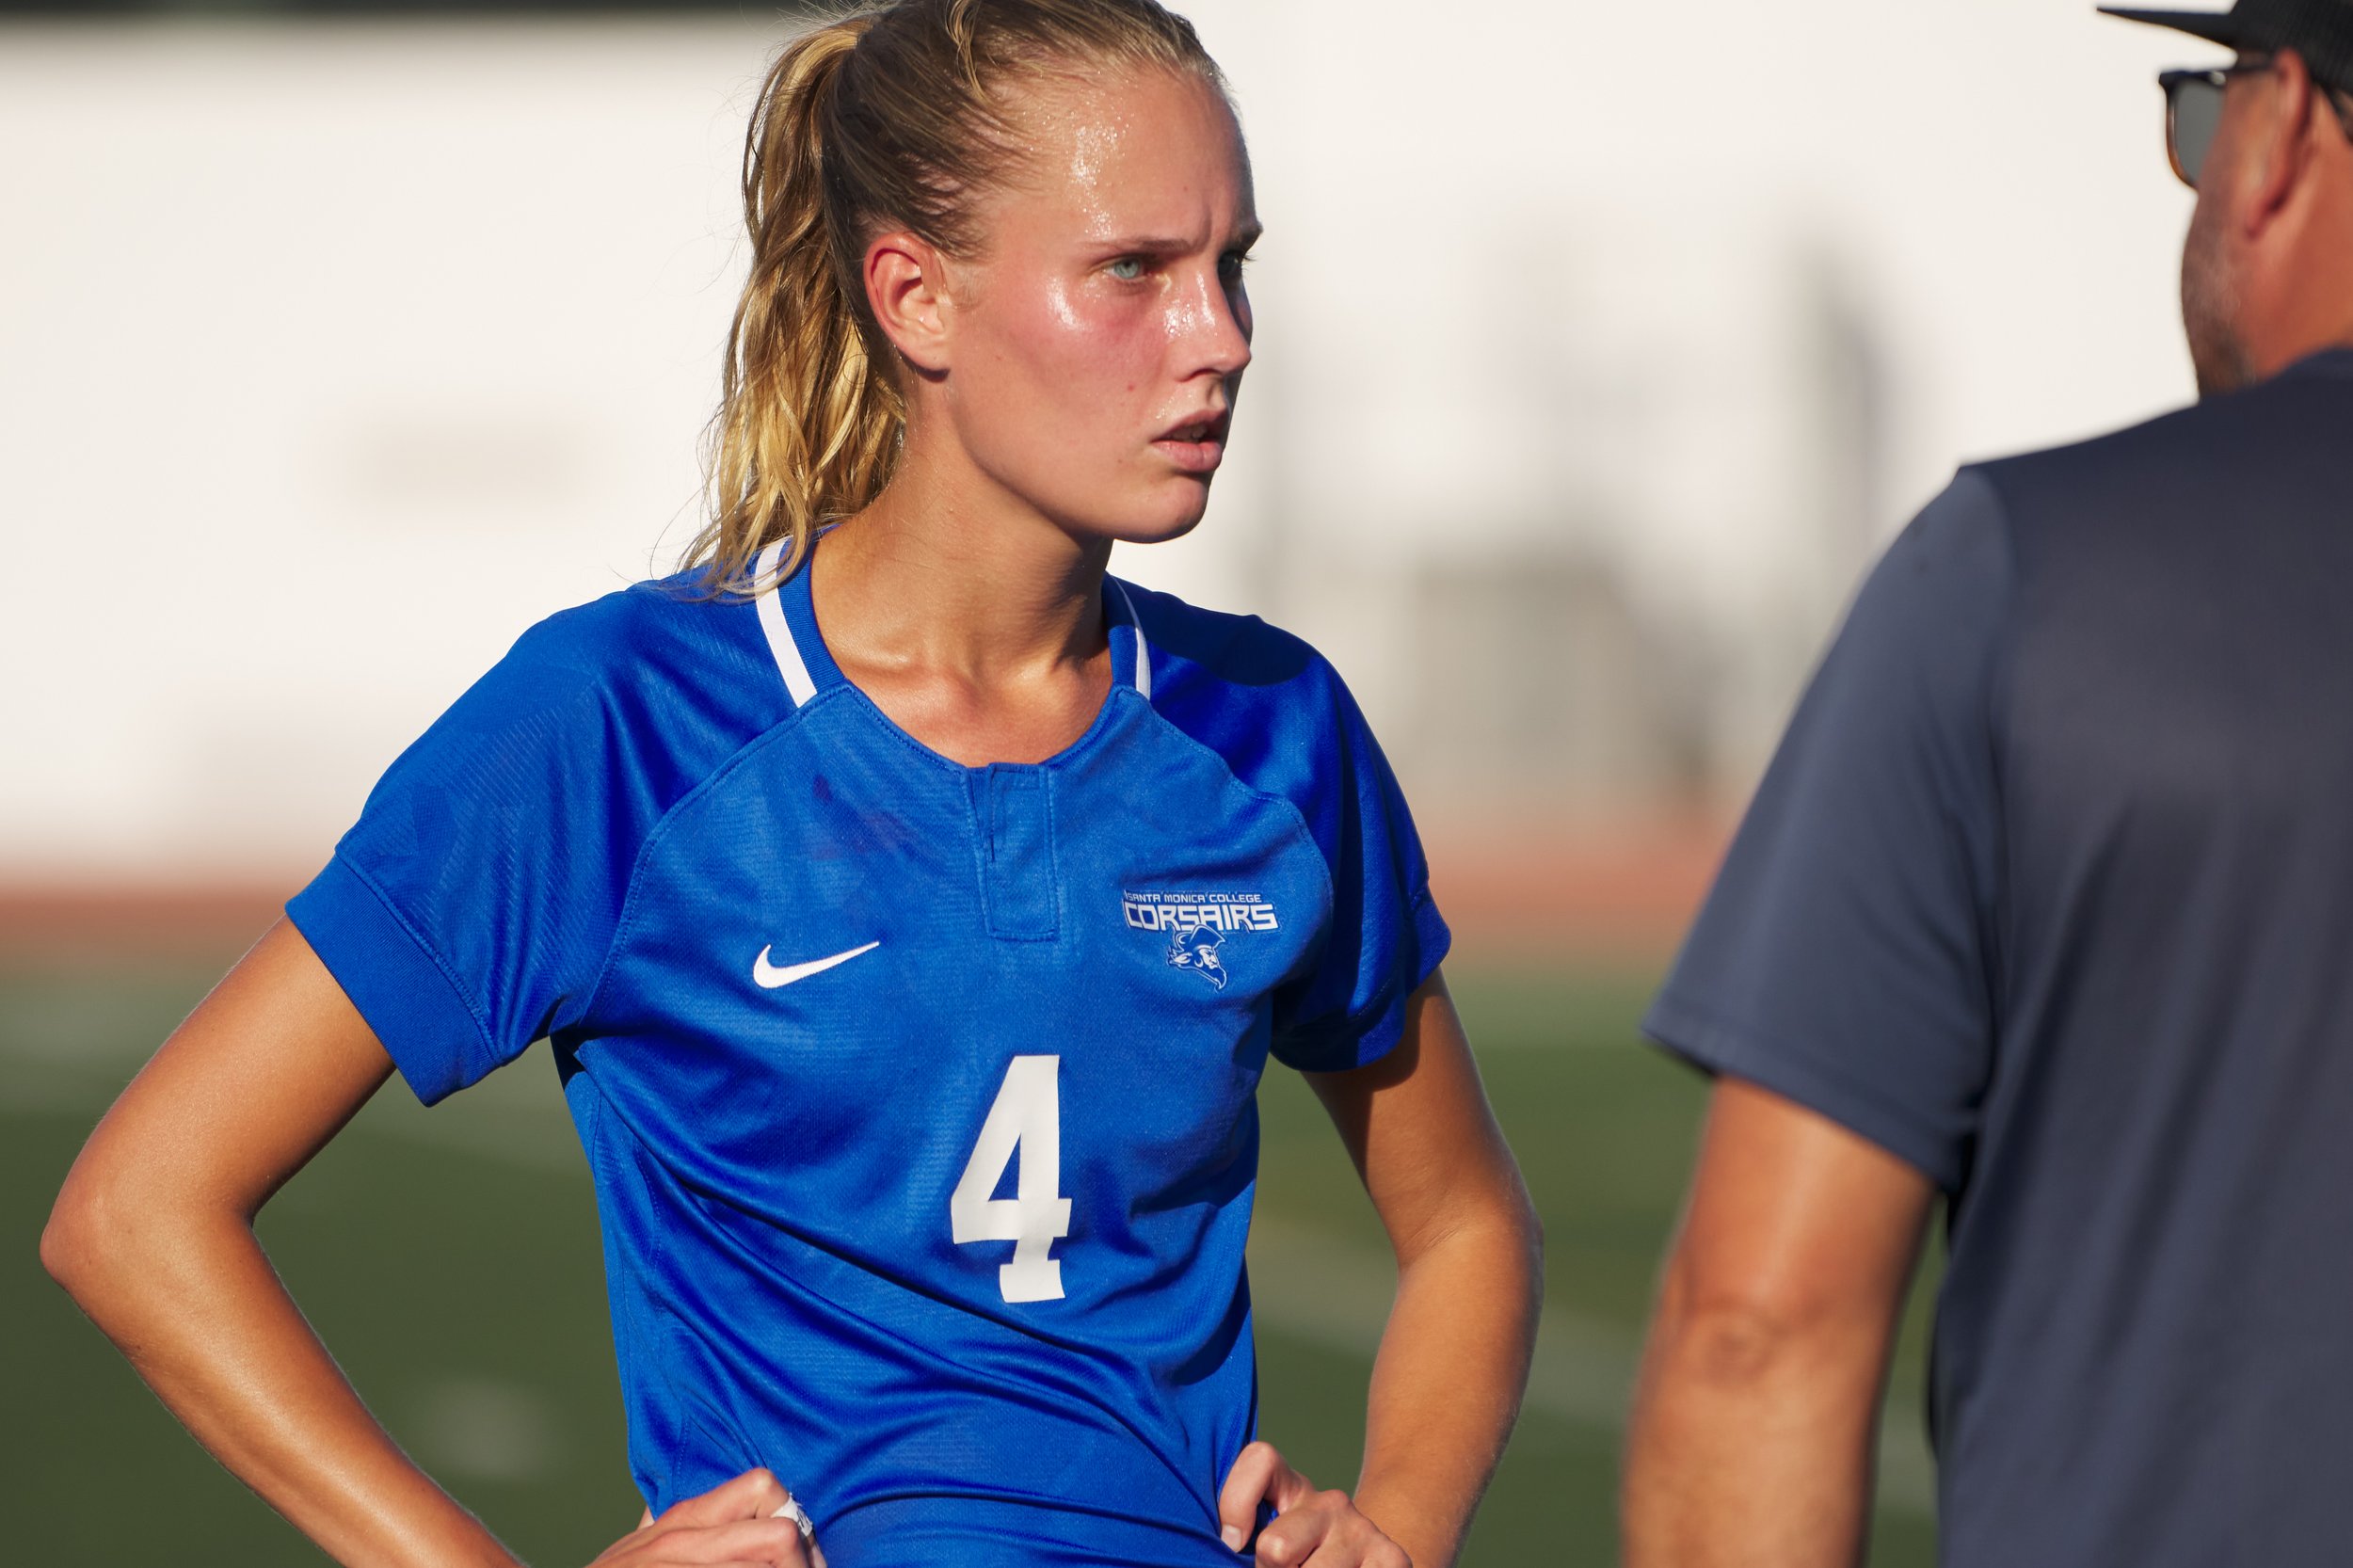  Santa Monica College Corsairs' Emma Rierstam during the women's soccer match against the West Los Angeles College Wildcats on Friday, Sept. 30, 2022, at Corsair Field in Santa Monica, Calif. The Corsairs won 3-2. (Nicholas McCall | The Corsair) 